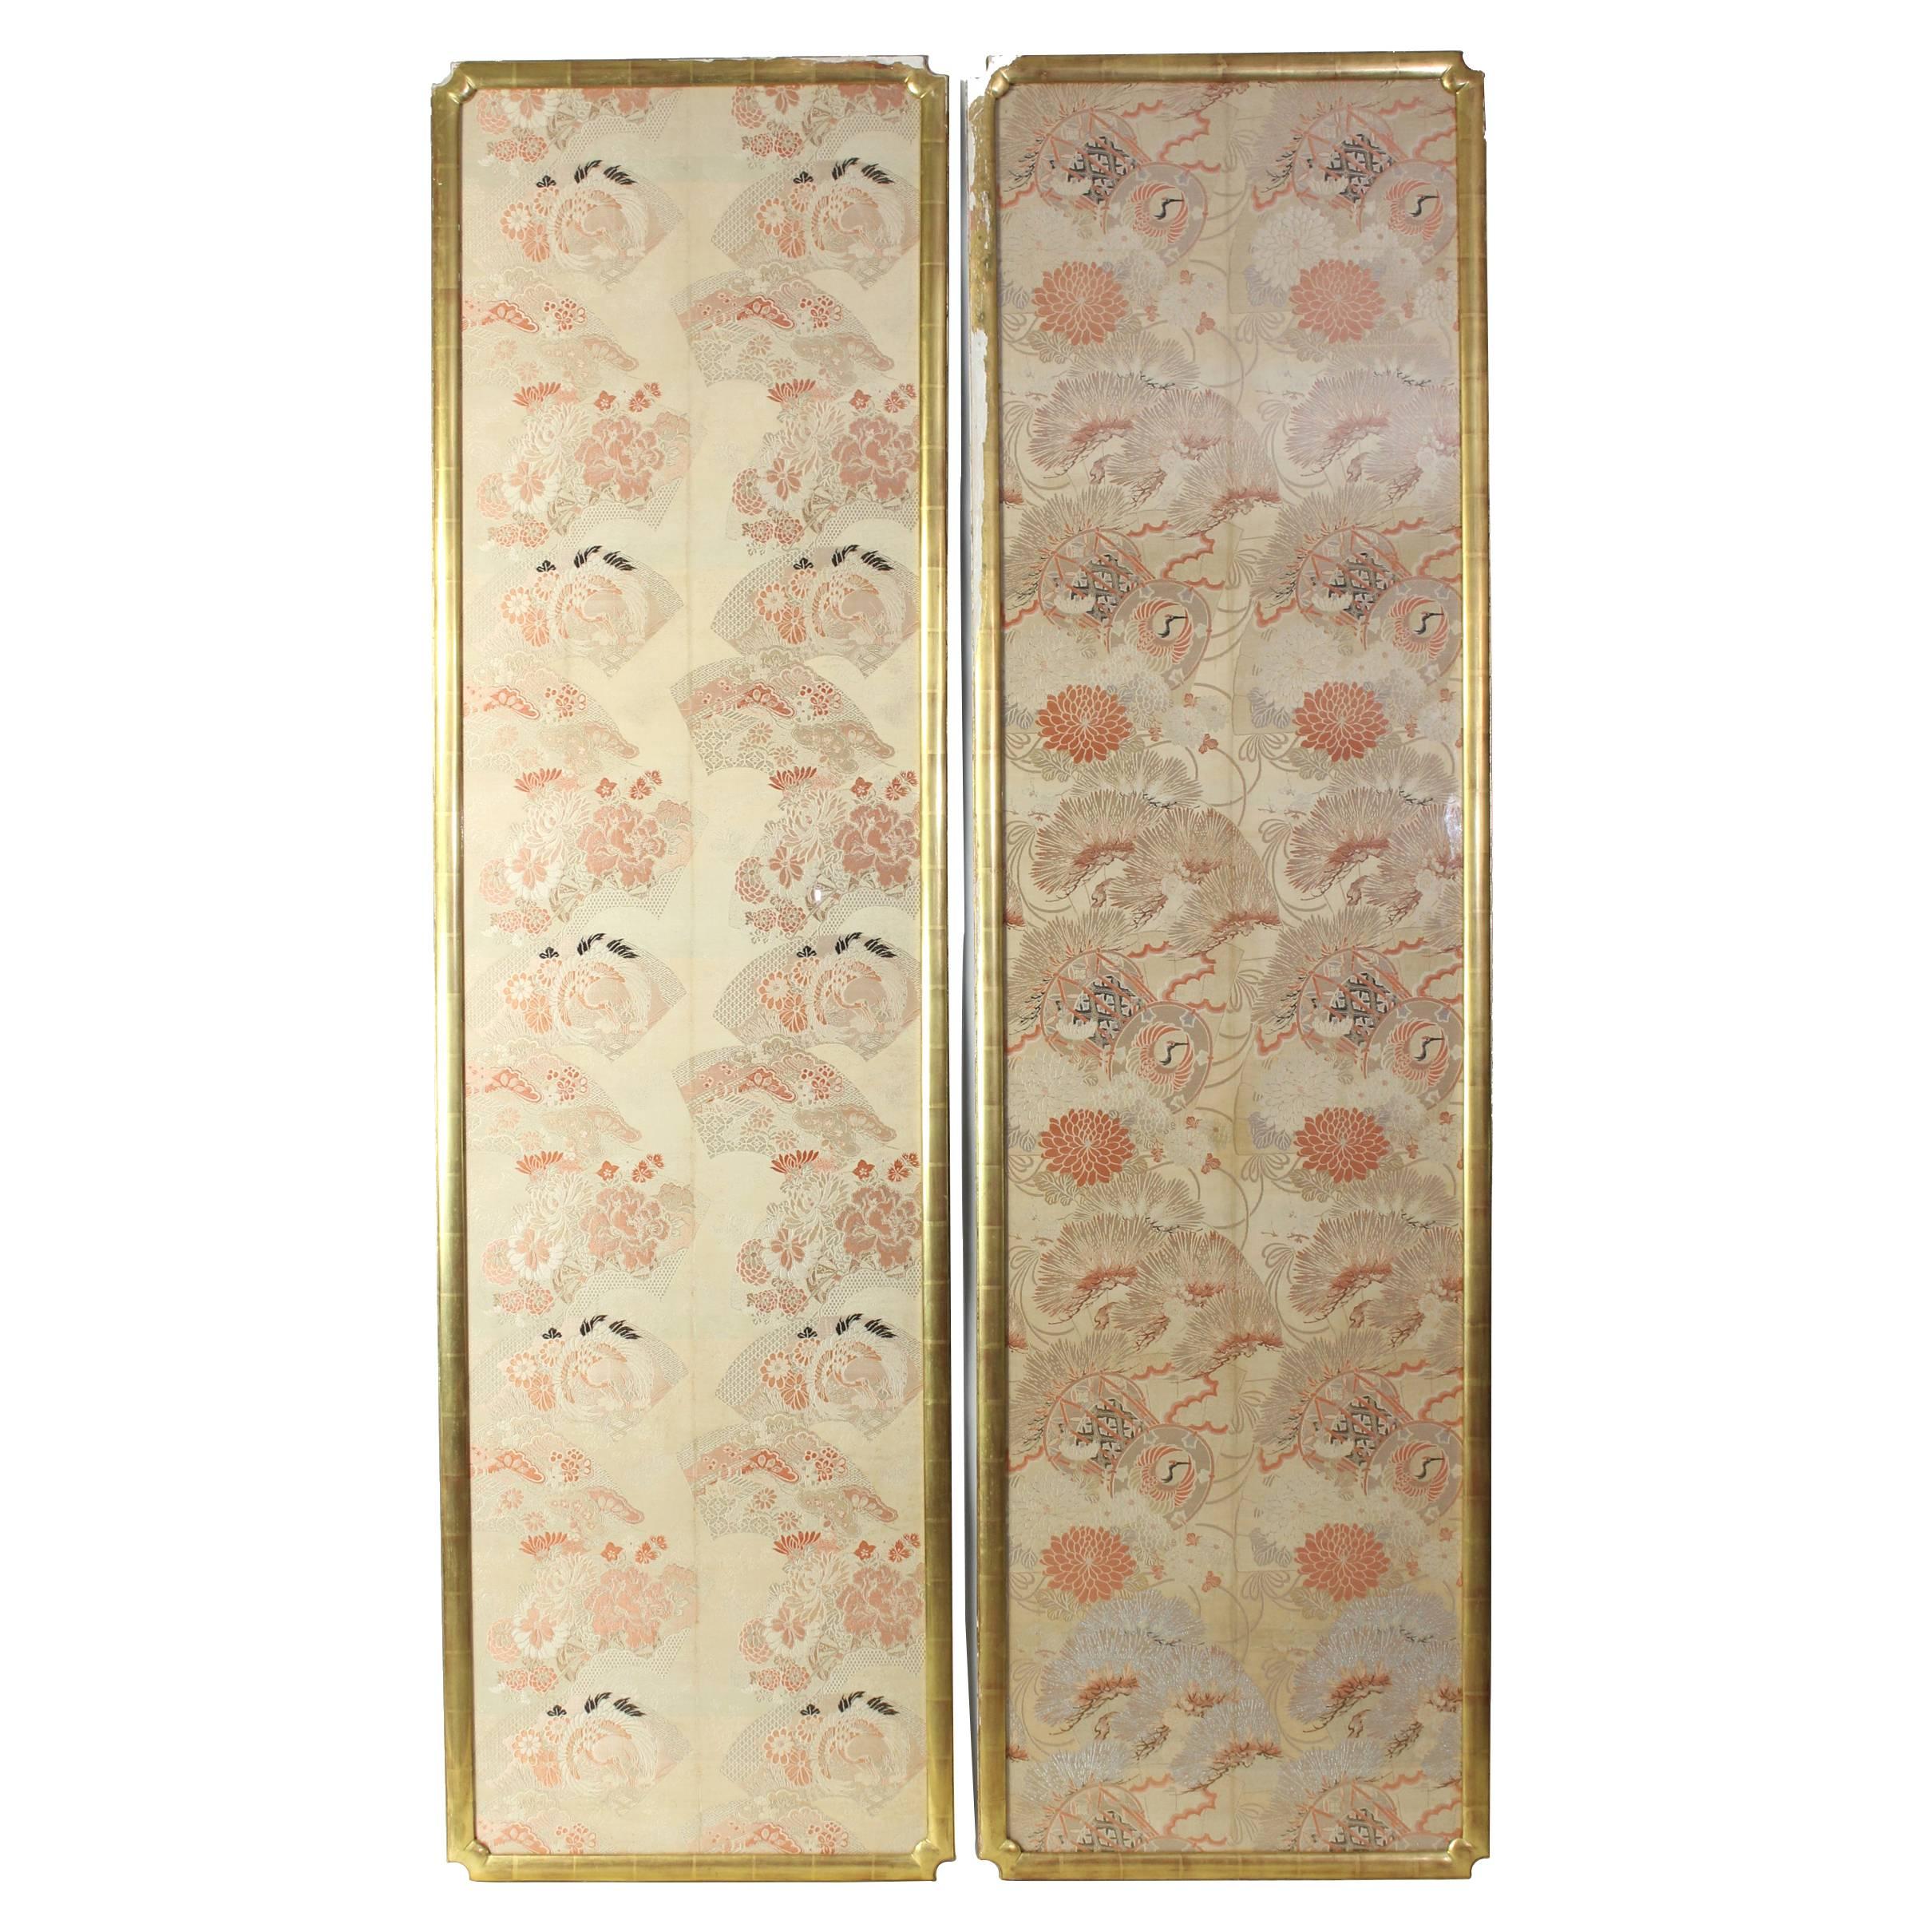 Exceptionally Large Japanese Brocade Silk Panels in Gilt Frames For Sale